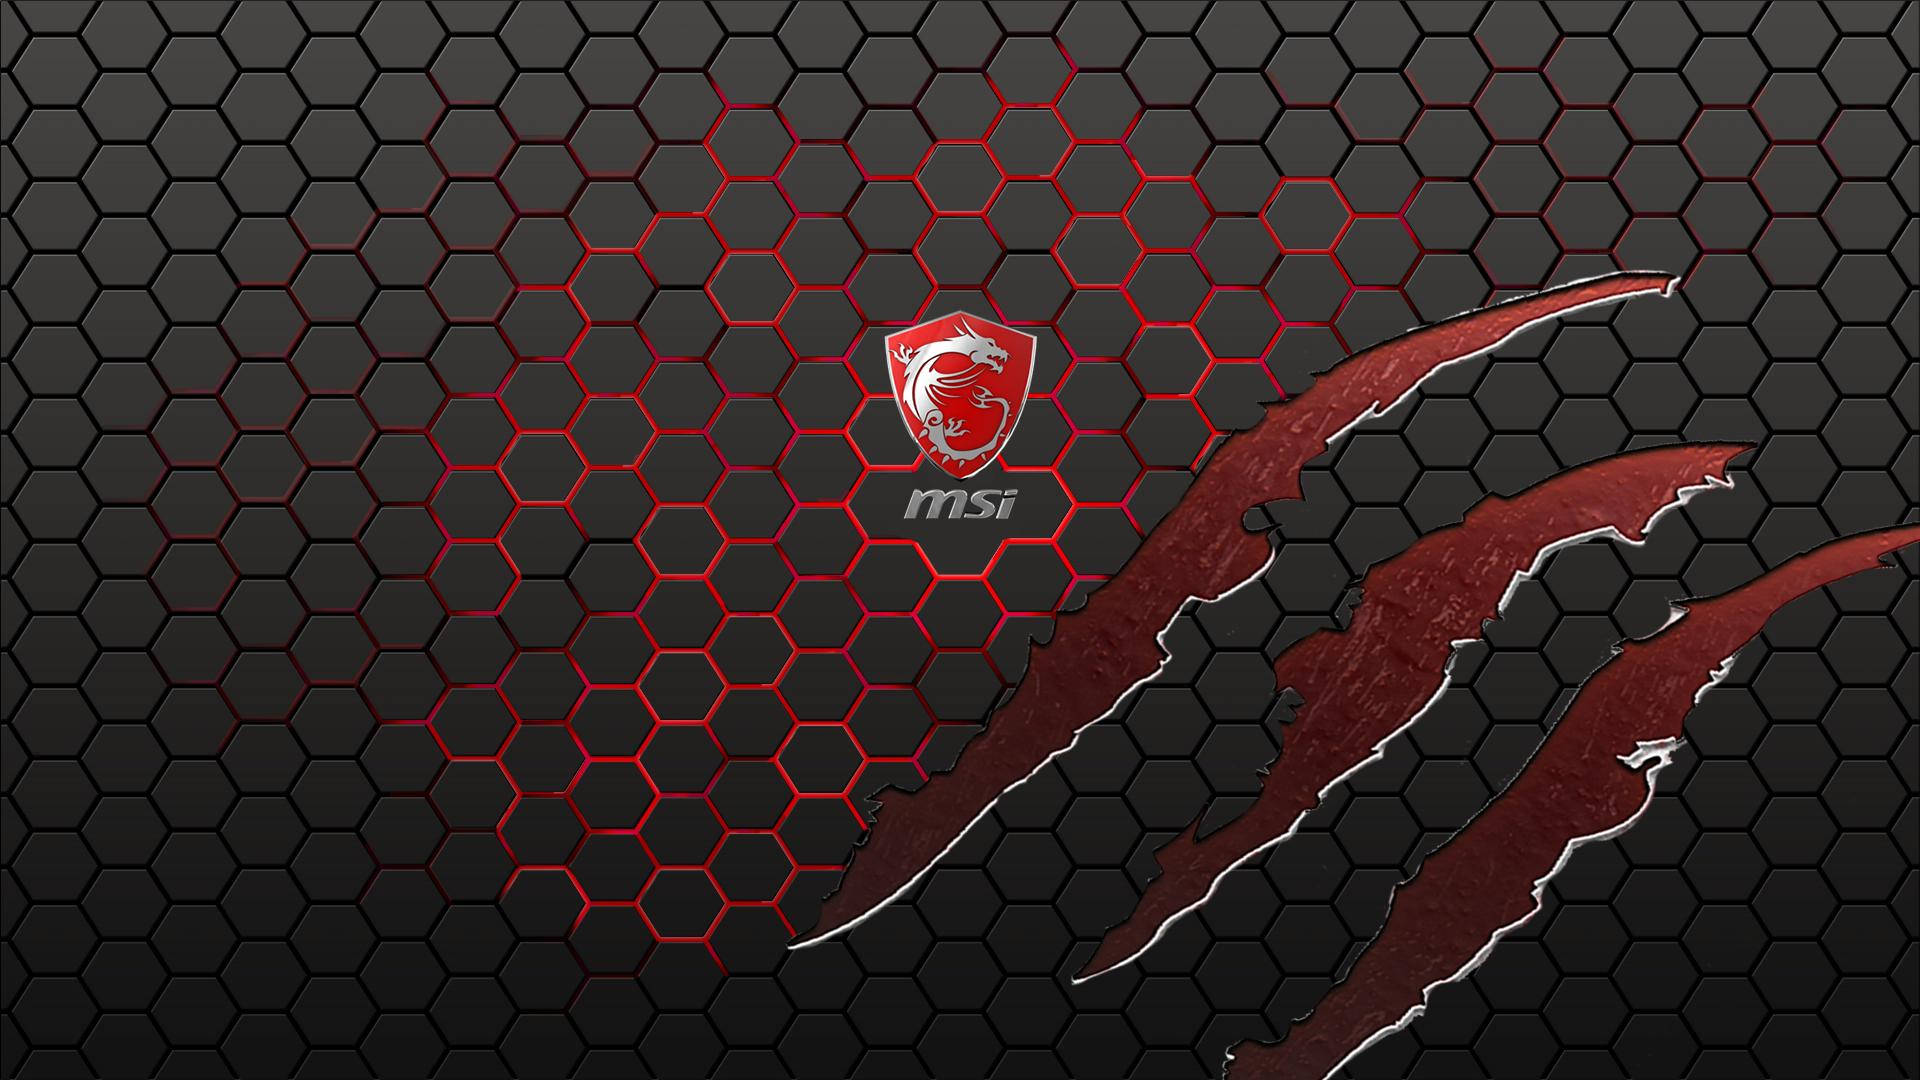 Msi Red Scratch On Black Honeycomb Background